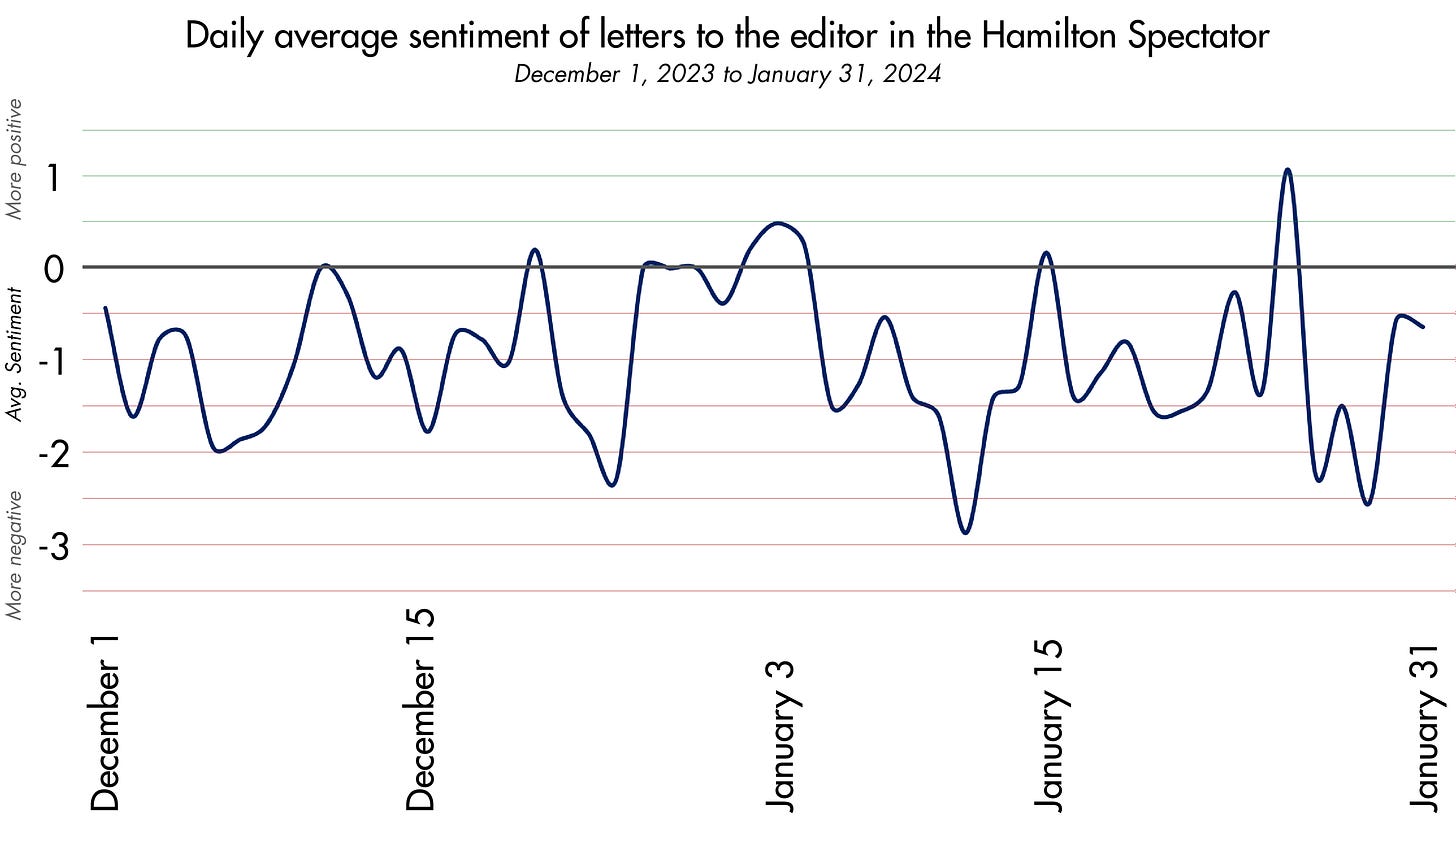 A graph showing the daily average score of letter to the editor sentiment, showing a mostly negative trend.